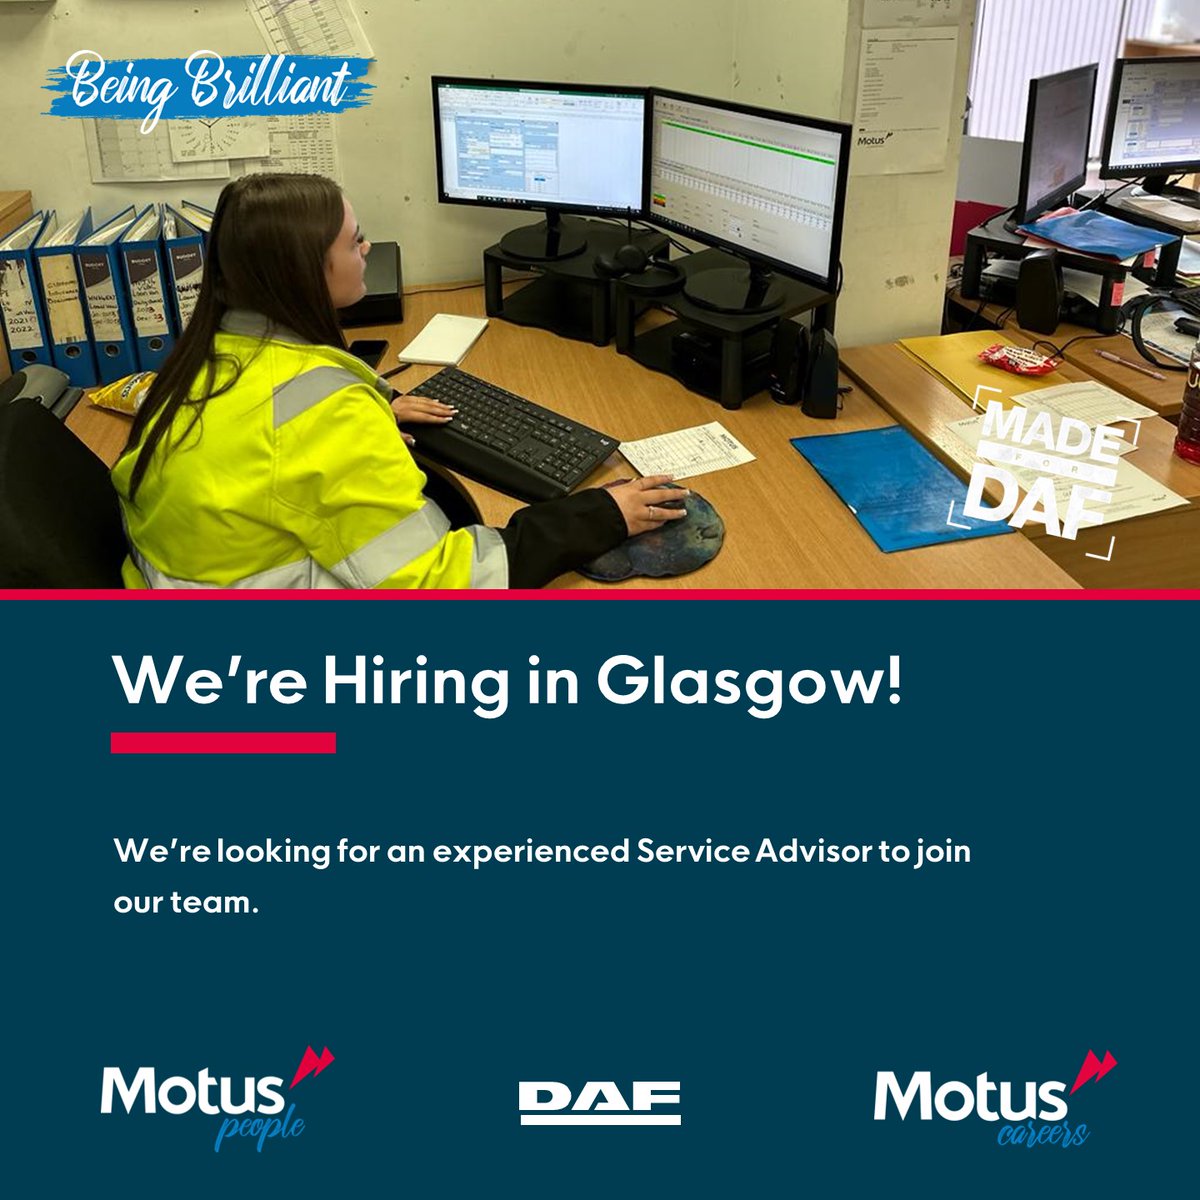 ⭐We're looking for an experienced Service Advisor in Glasgow!⭐ To apply, text MOTUS GLA to 66777 Or email your CV to recruitment@motuscommercials.co.uk Find out more➡️ loom.ly/Fa-5nsU #Jobs #JobSearch #Hiring #Vacancy #Careers #MotusPeople #MotusCommercials